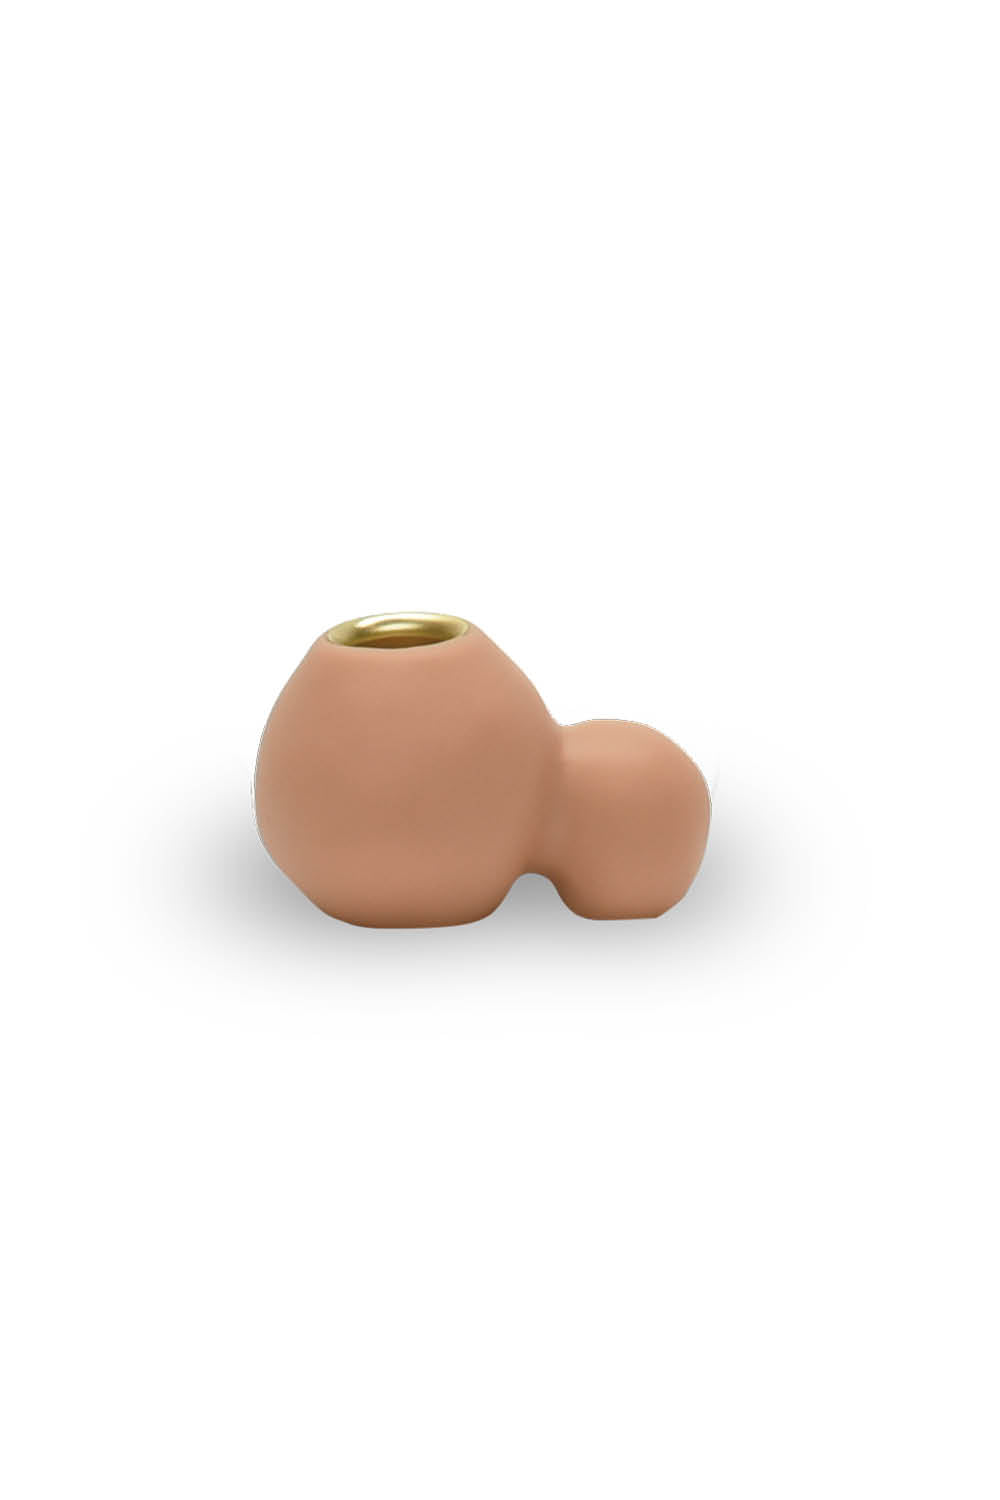 BUBBLE Petite Candleholder in Nude